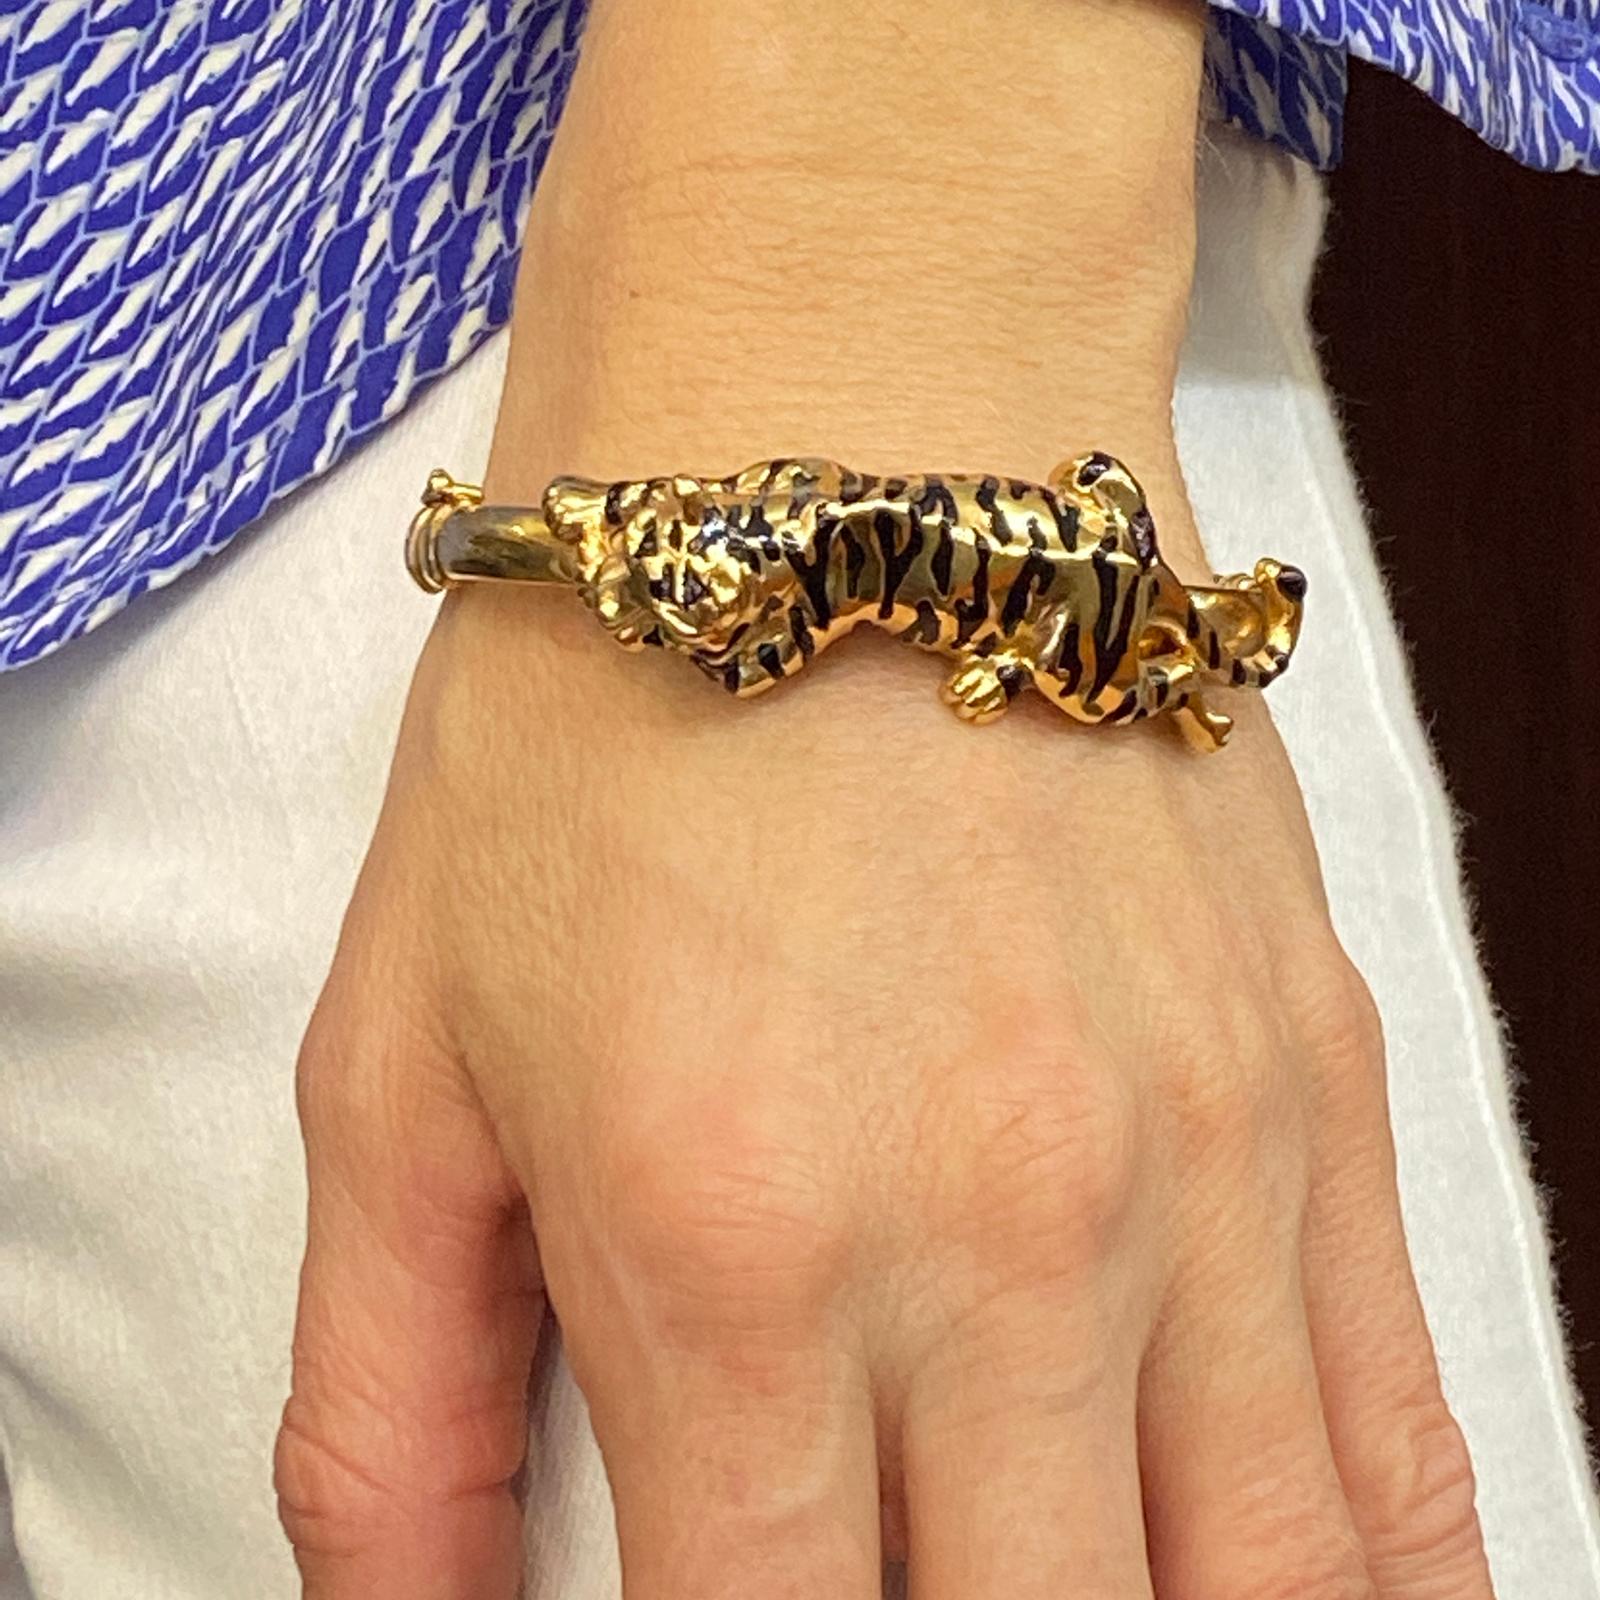 Italian enamel tiger bangle bracelet fashioned in 14 karat yellow gold. The hinged bangle features a black enamel tiger with emerald eyes. The tiger measures 20mm in width, and the bracelet measures 7 inches in circumference. 